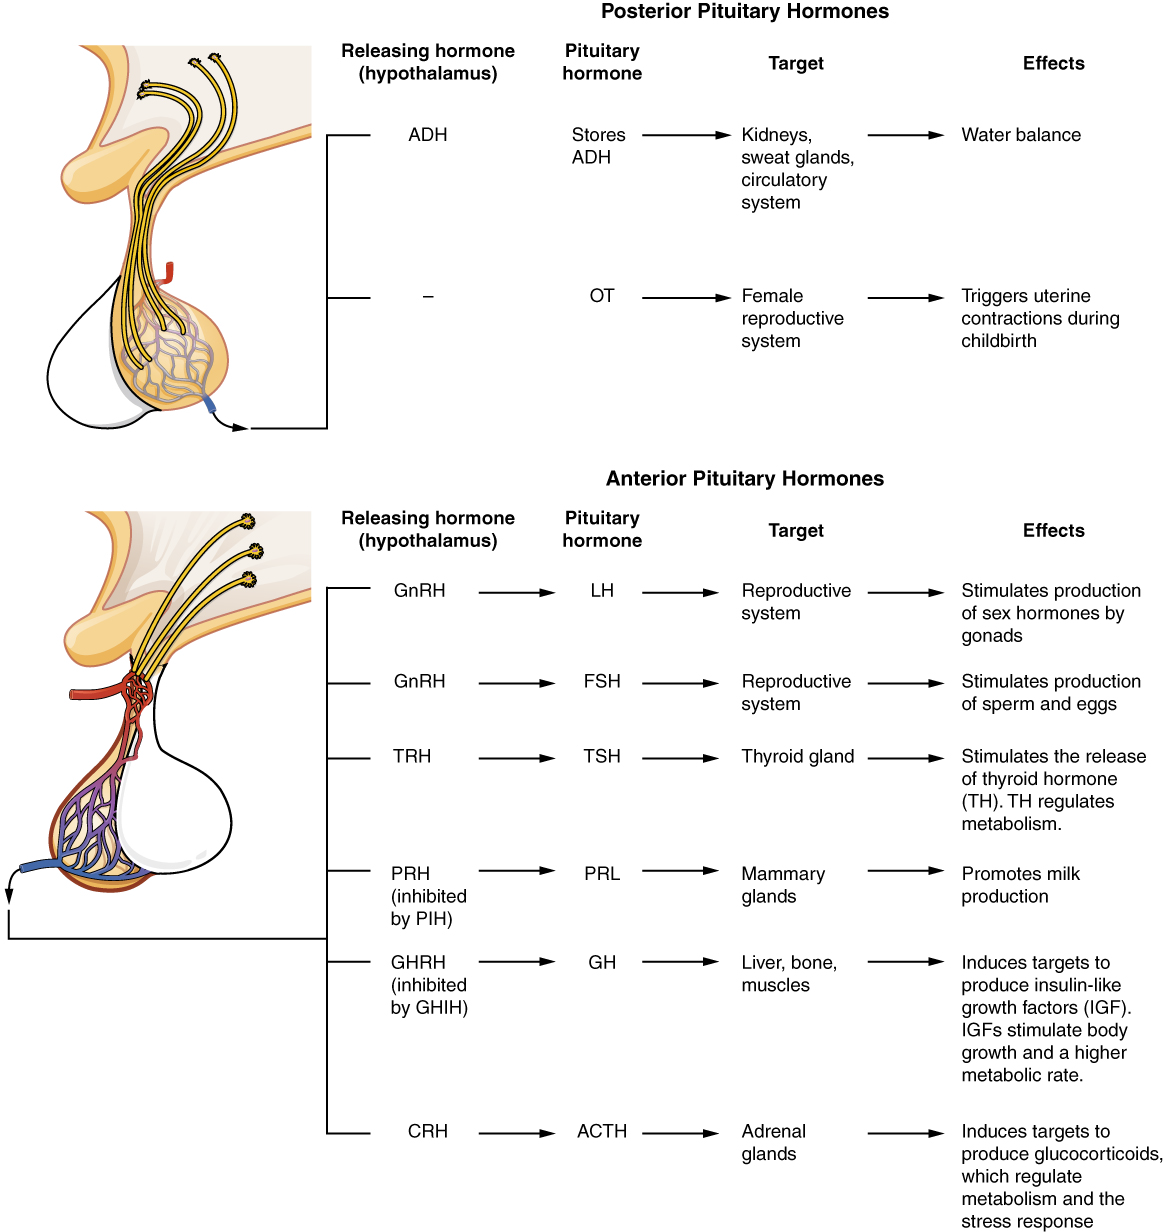 File:Pituitary Phys.png